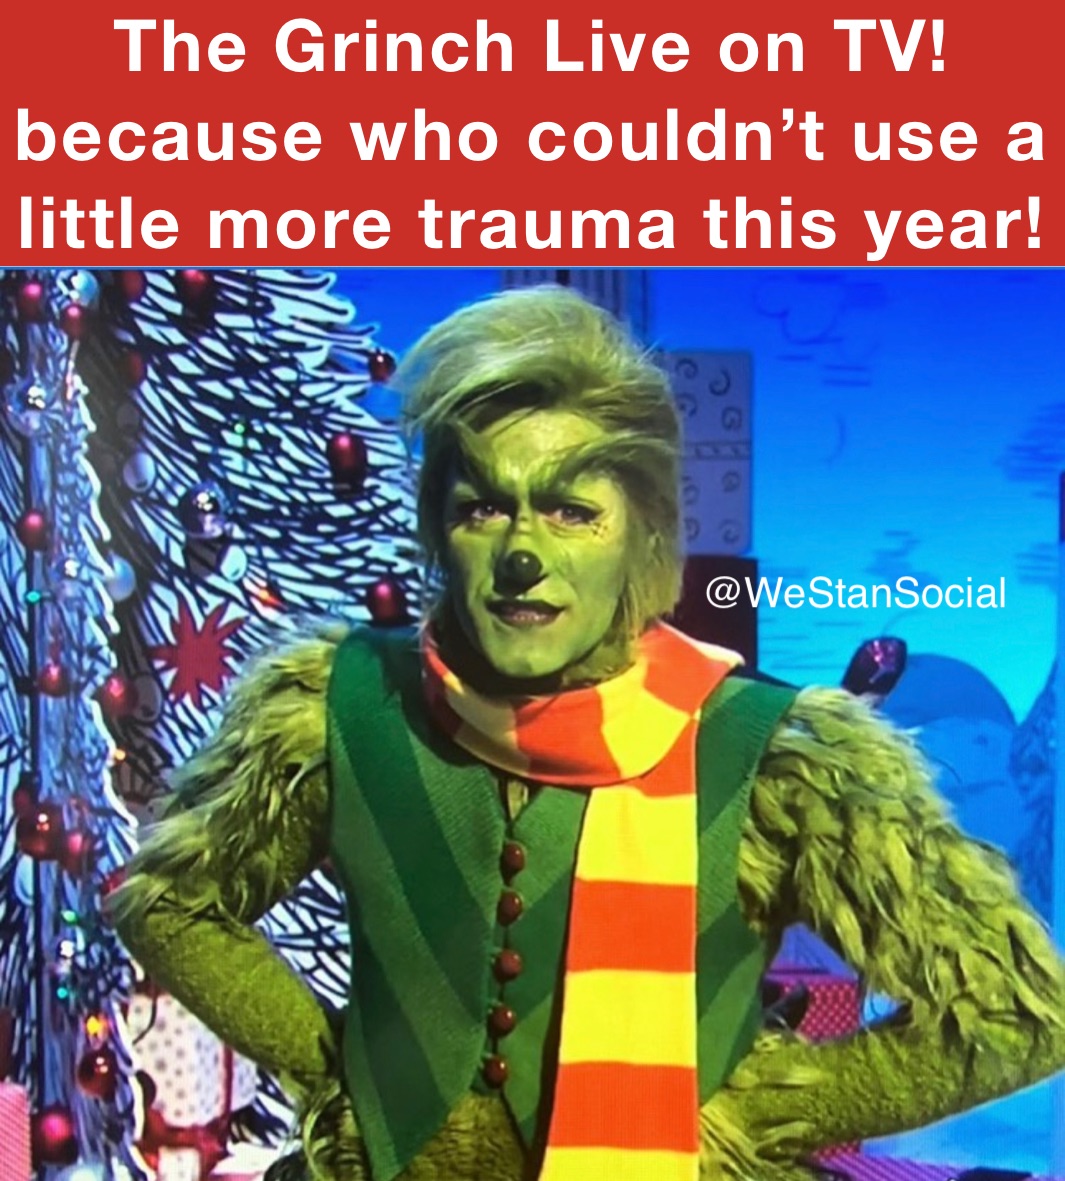 The Grinch Live on TV!
because who couldn’t use a little more trauma this year!